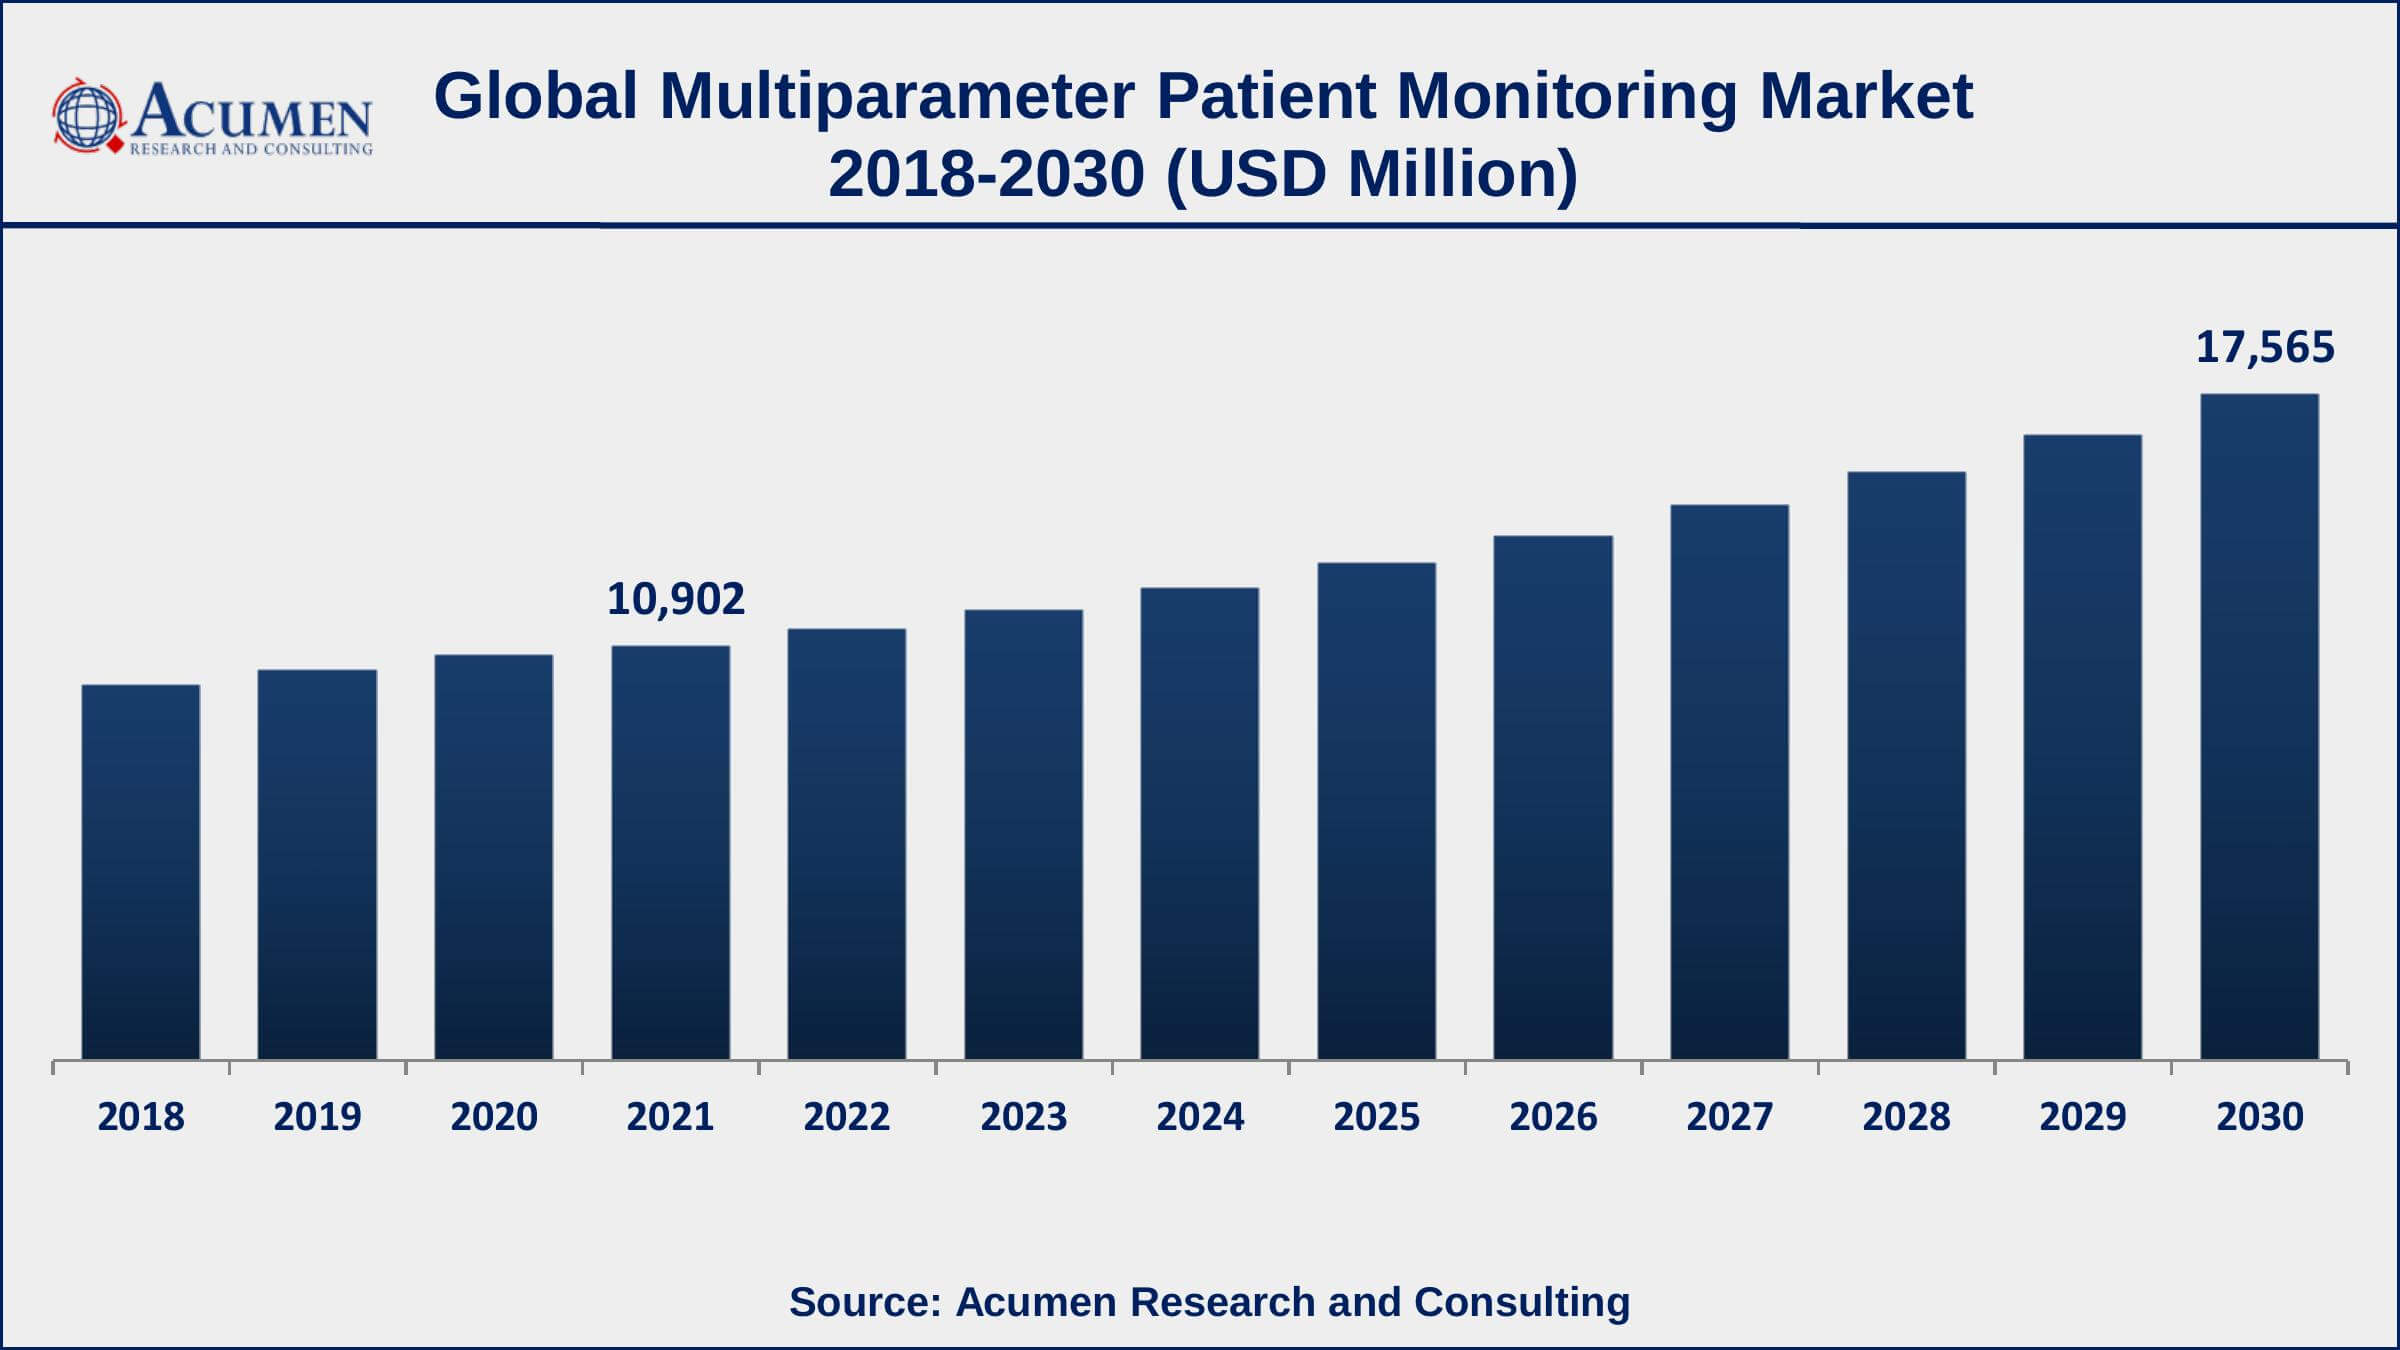 North America region led with more than 41% multiparameter patient monitoring market share in 2021